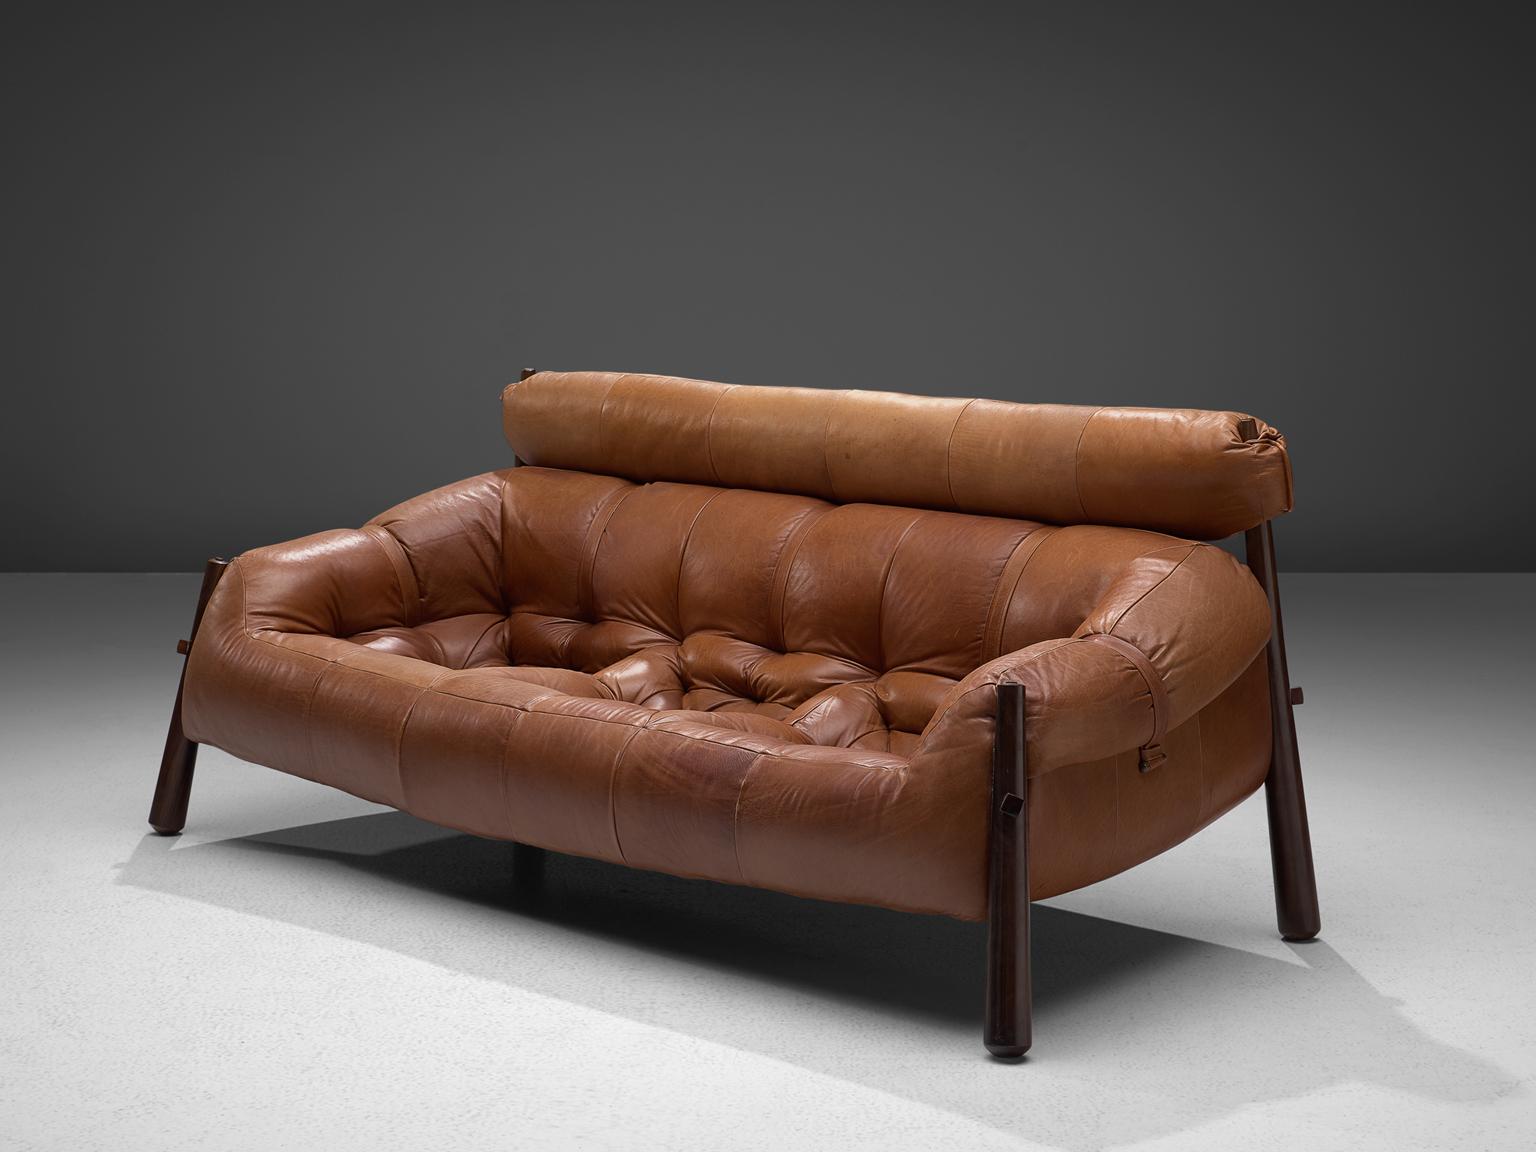 Percival Lafer 'Mp-81' Lounge Set in Rosewood and Cognac 1